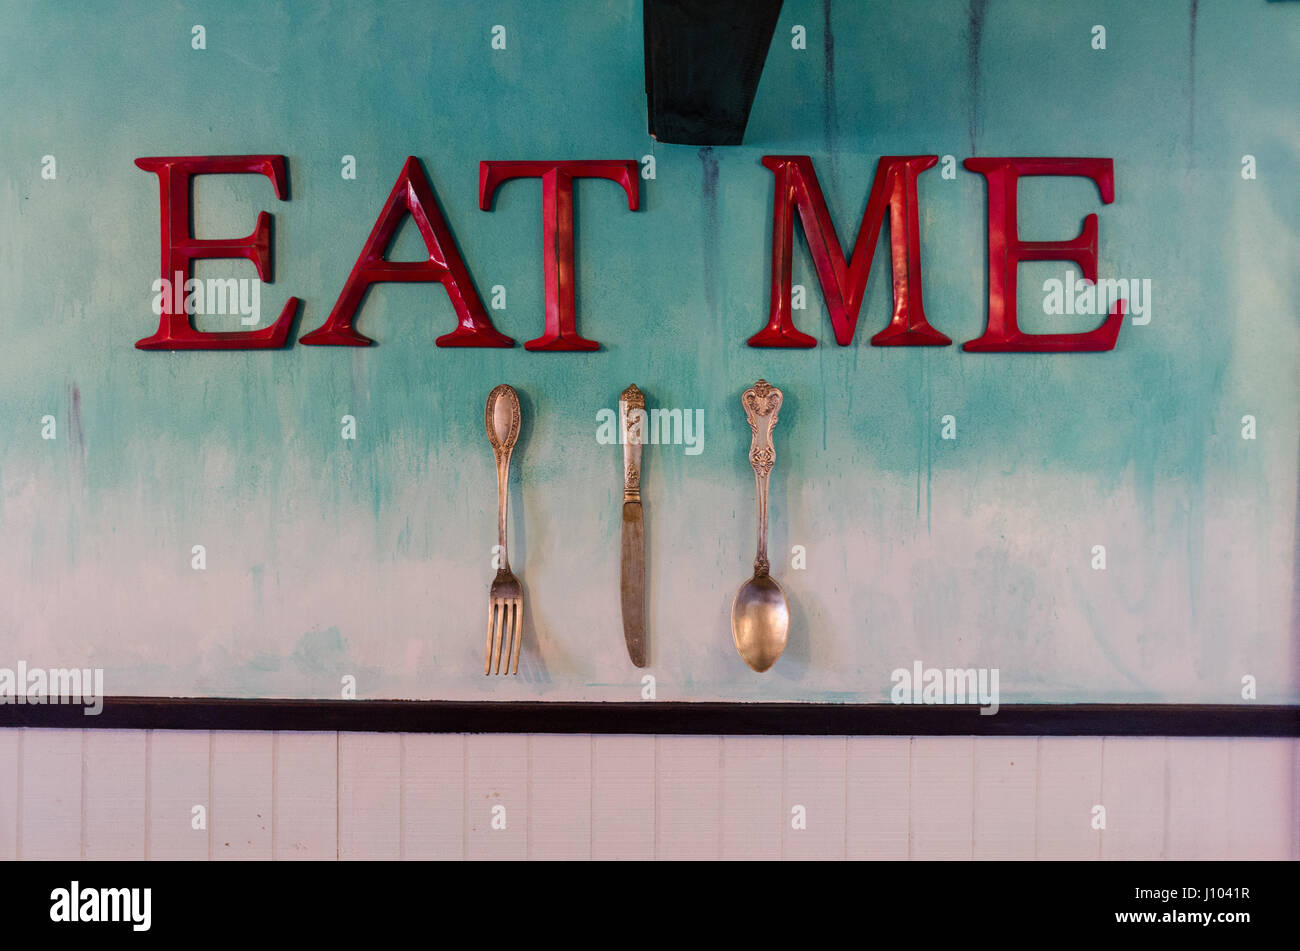 'Eat me' sign on a wall Stock Photo